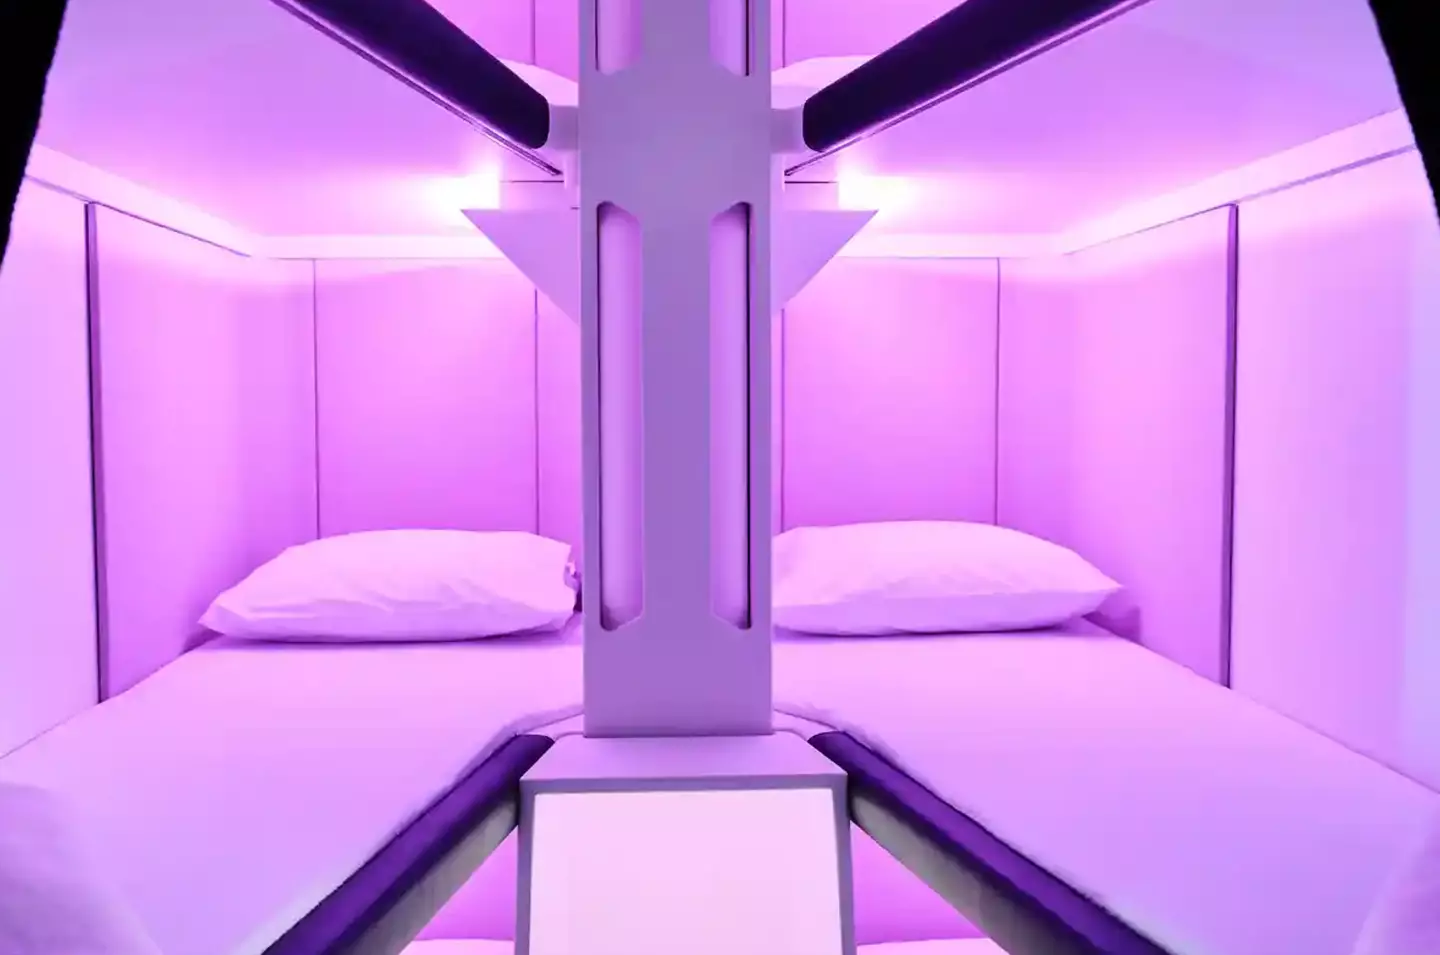 The airline is hoping to launch the communal sleeping spaces by 2024.